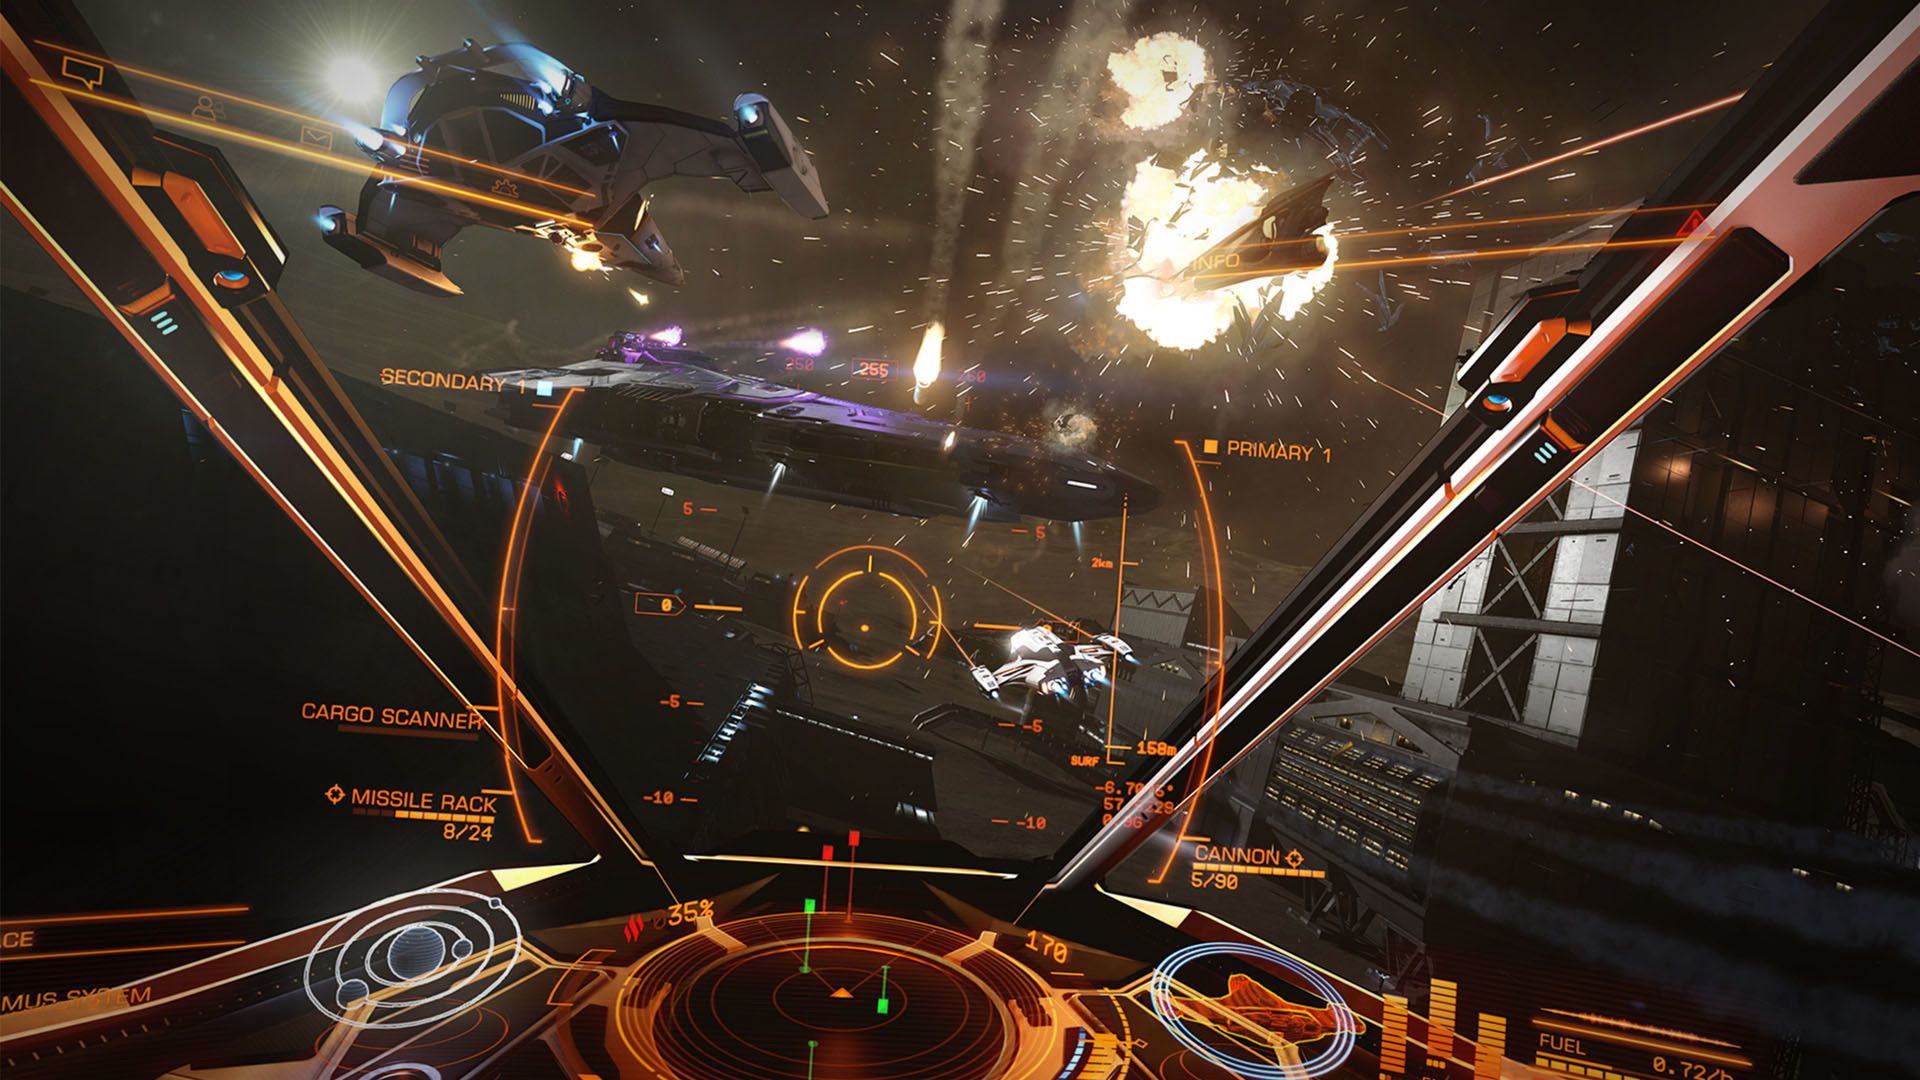 Elite Dangerous' is Going Free on Epic Games Store Starting Today